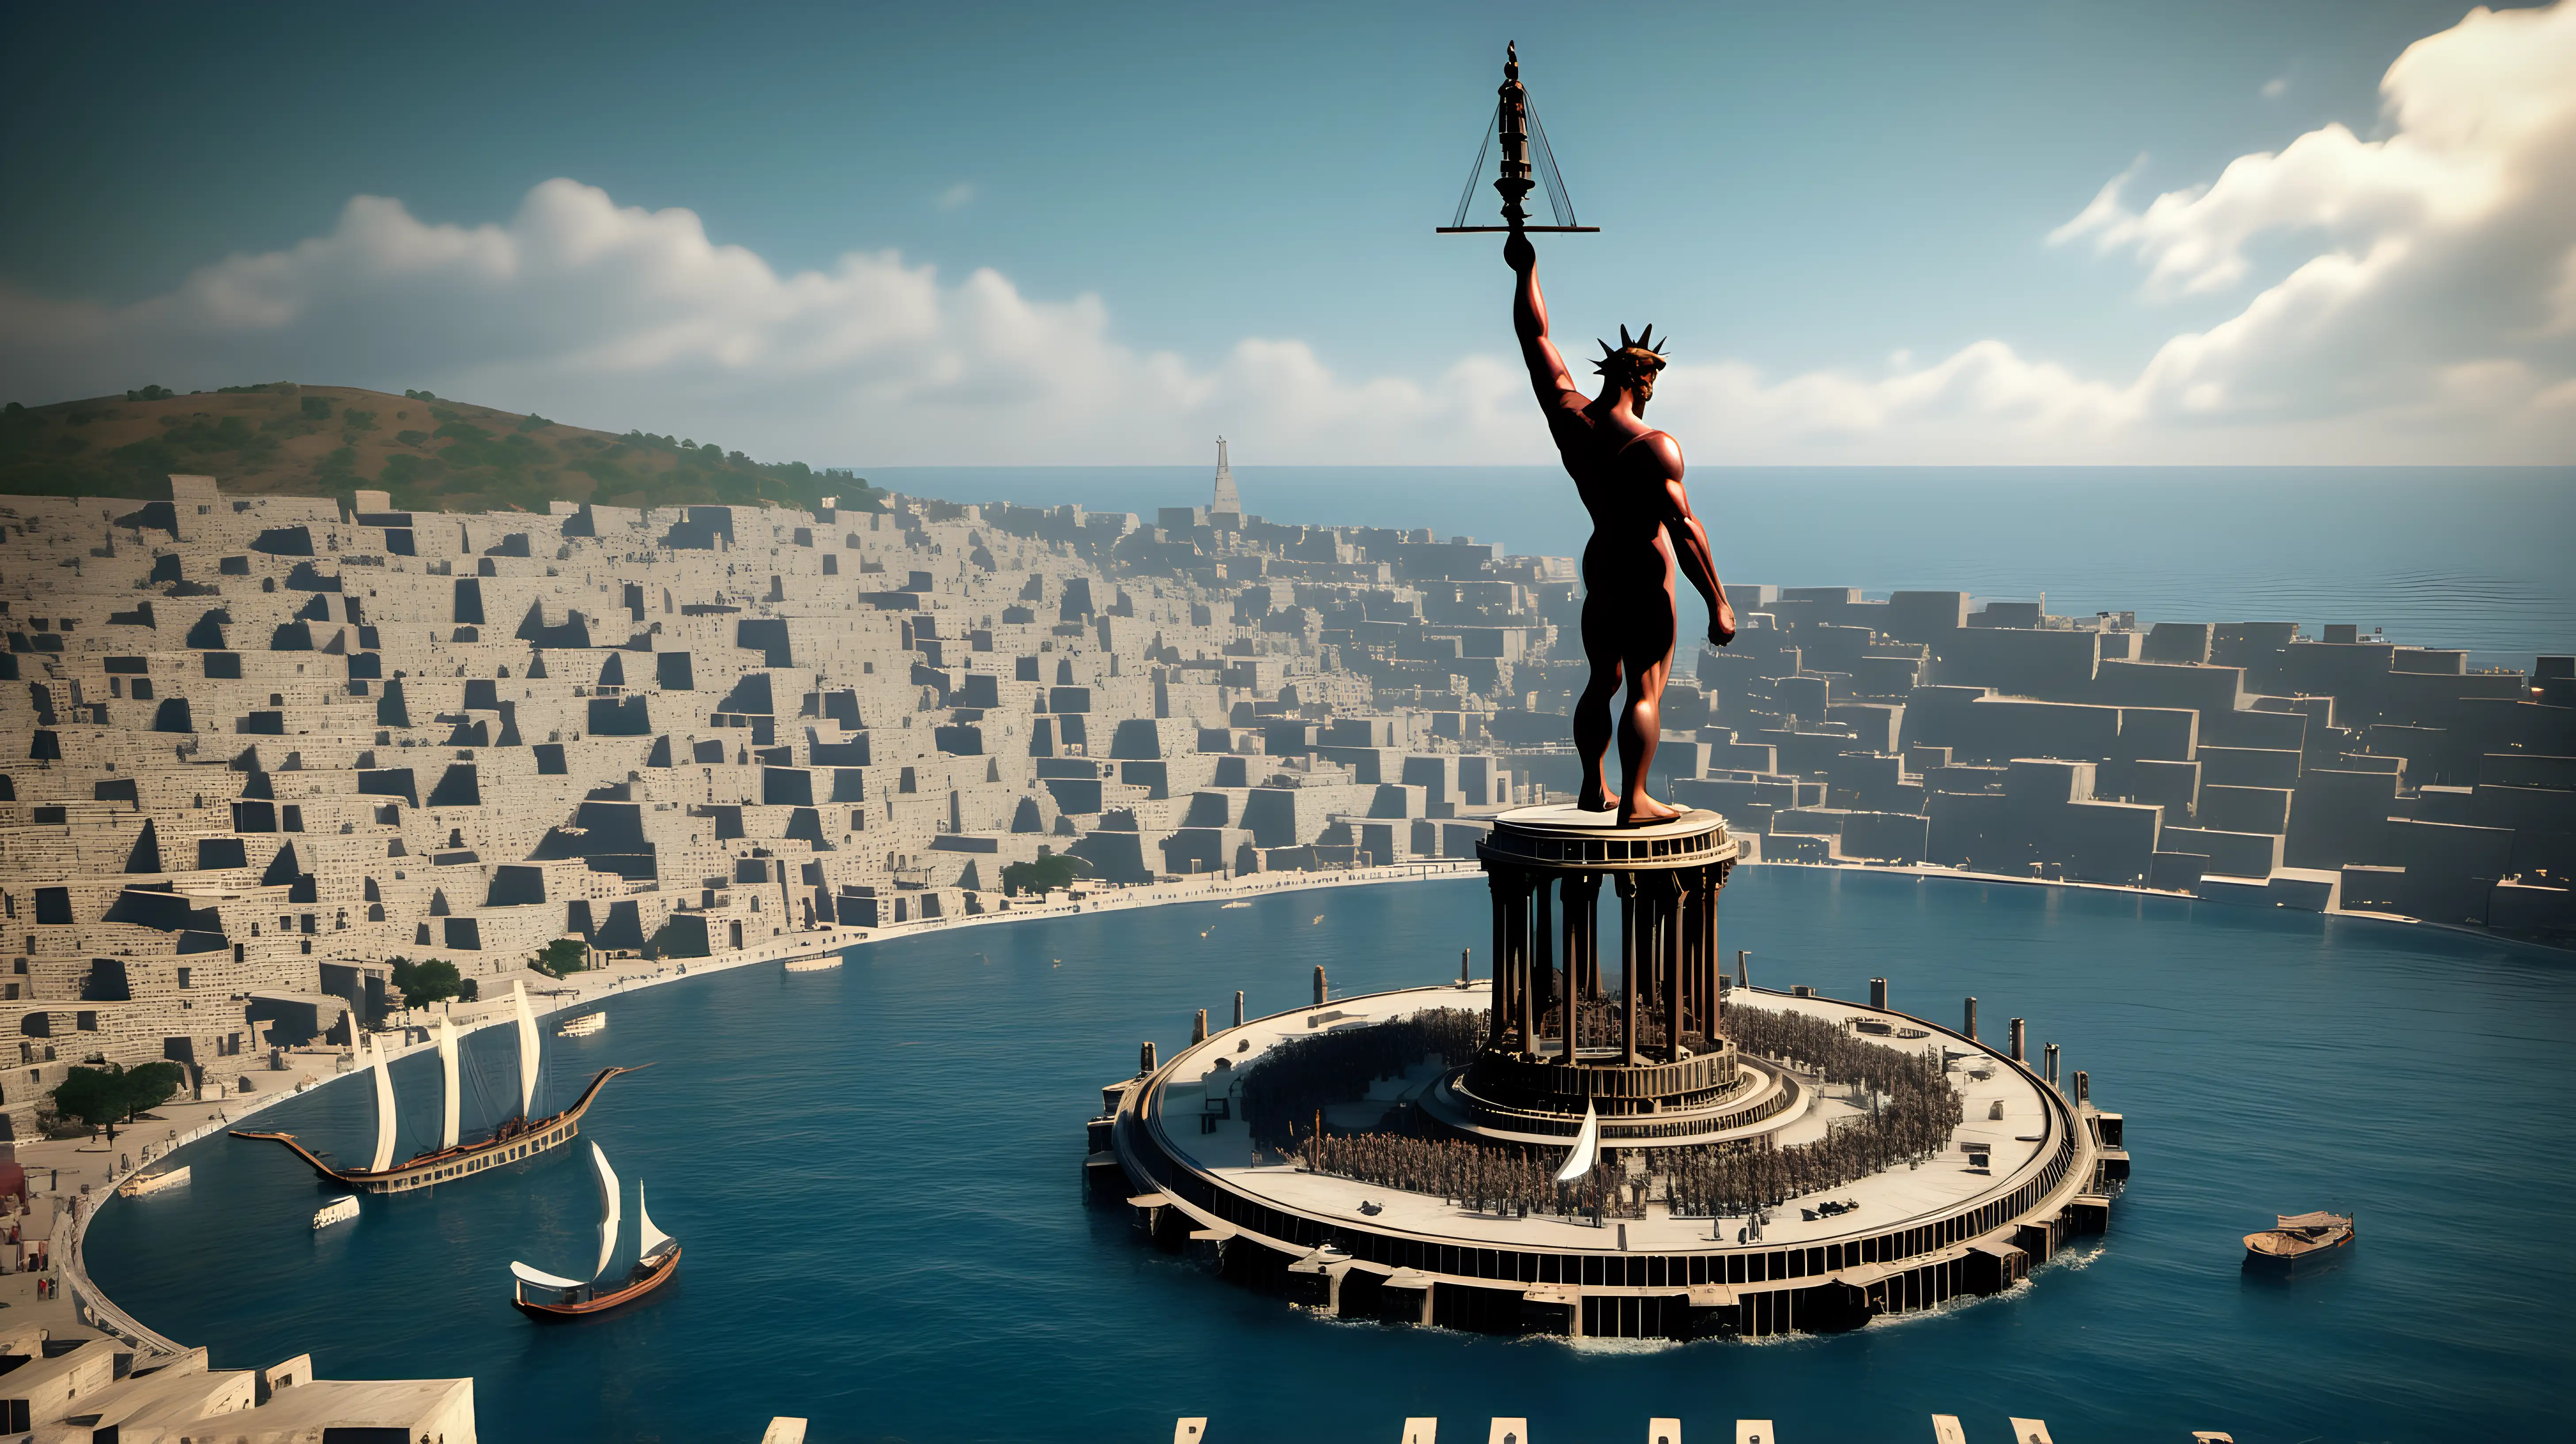 Magnificent Colossus of Rhodes Showcase of Ancient Splendor